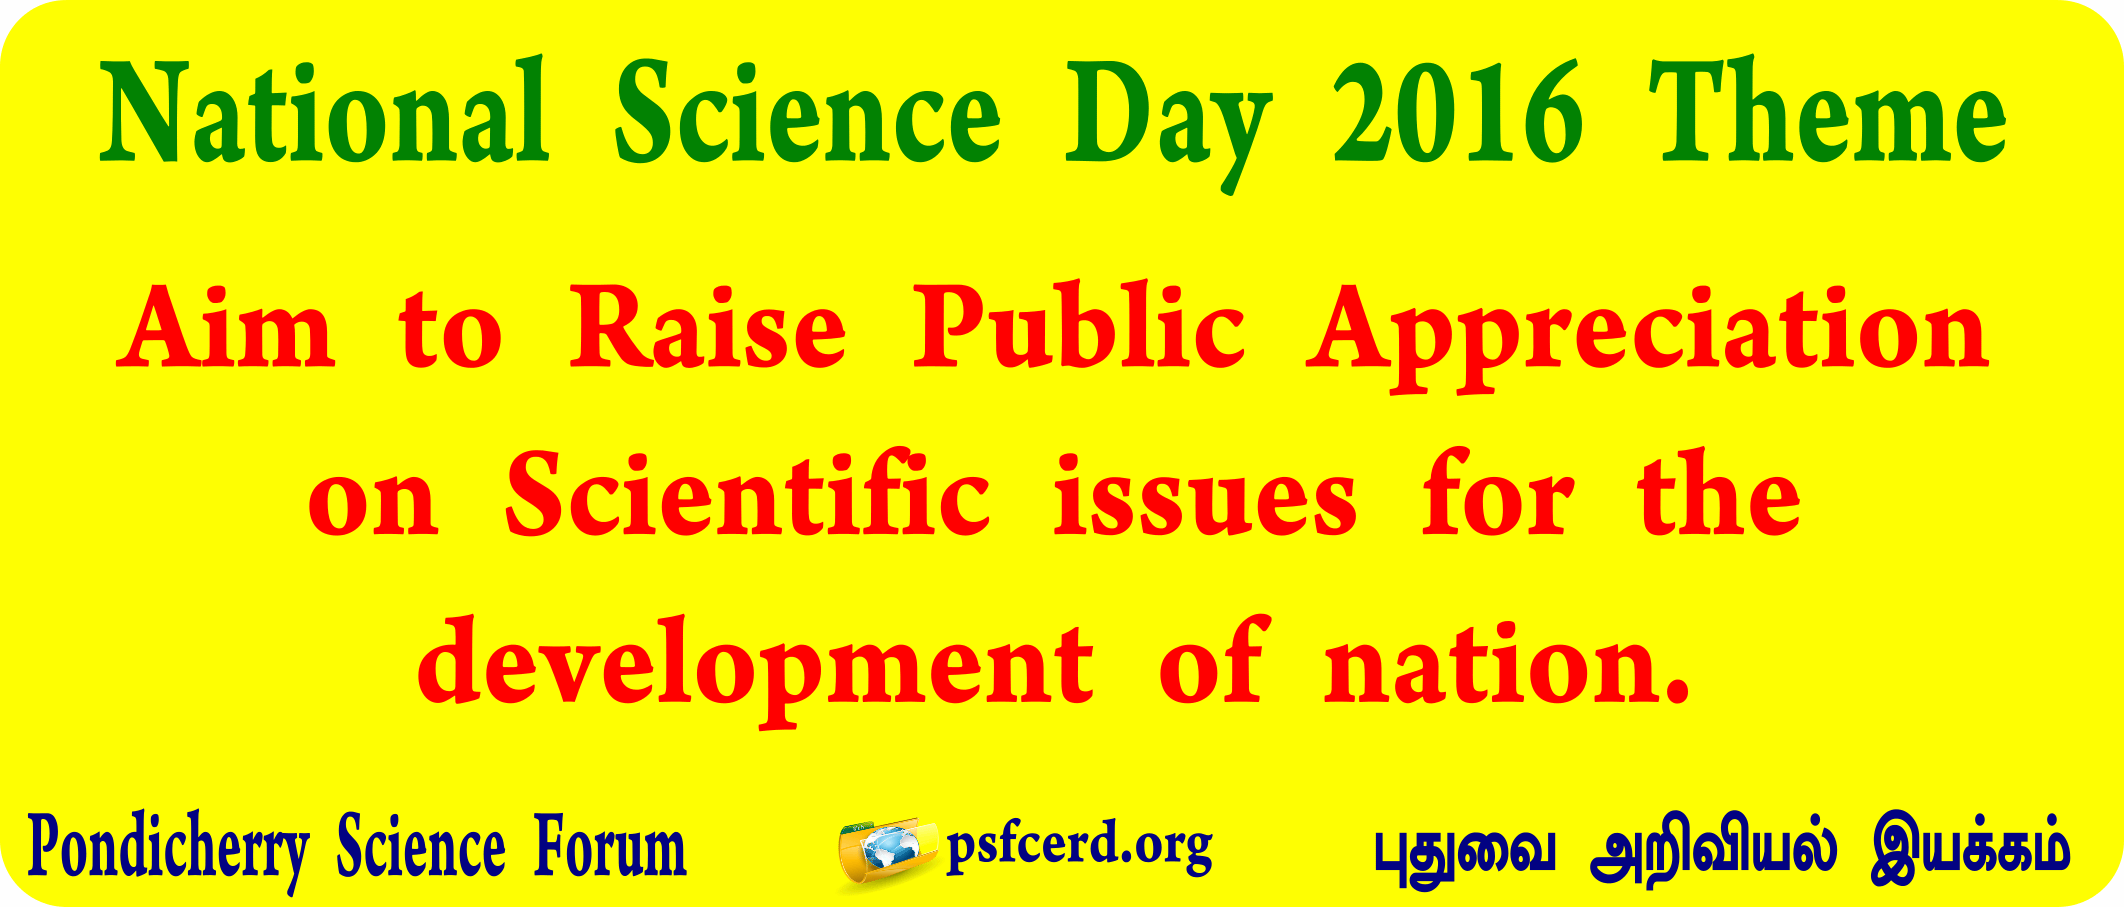 National Science Day 2016 Theme